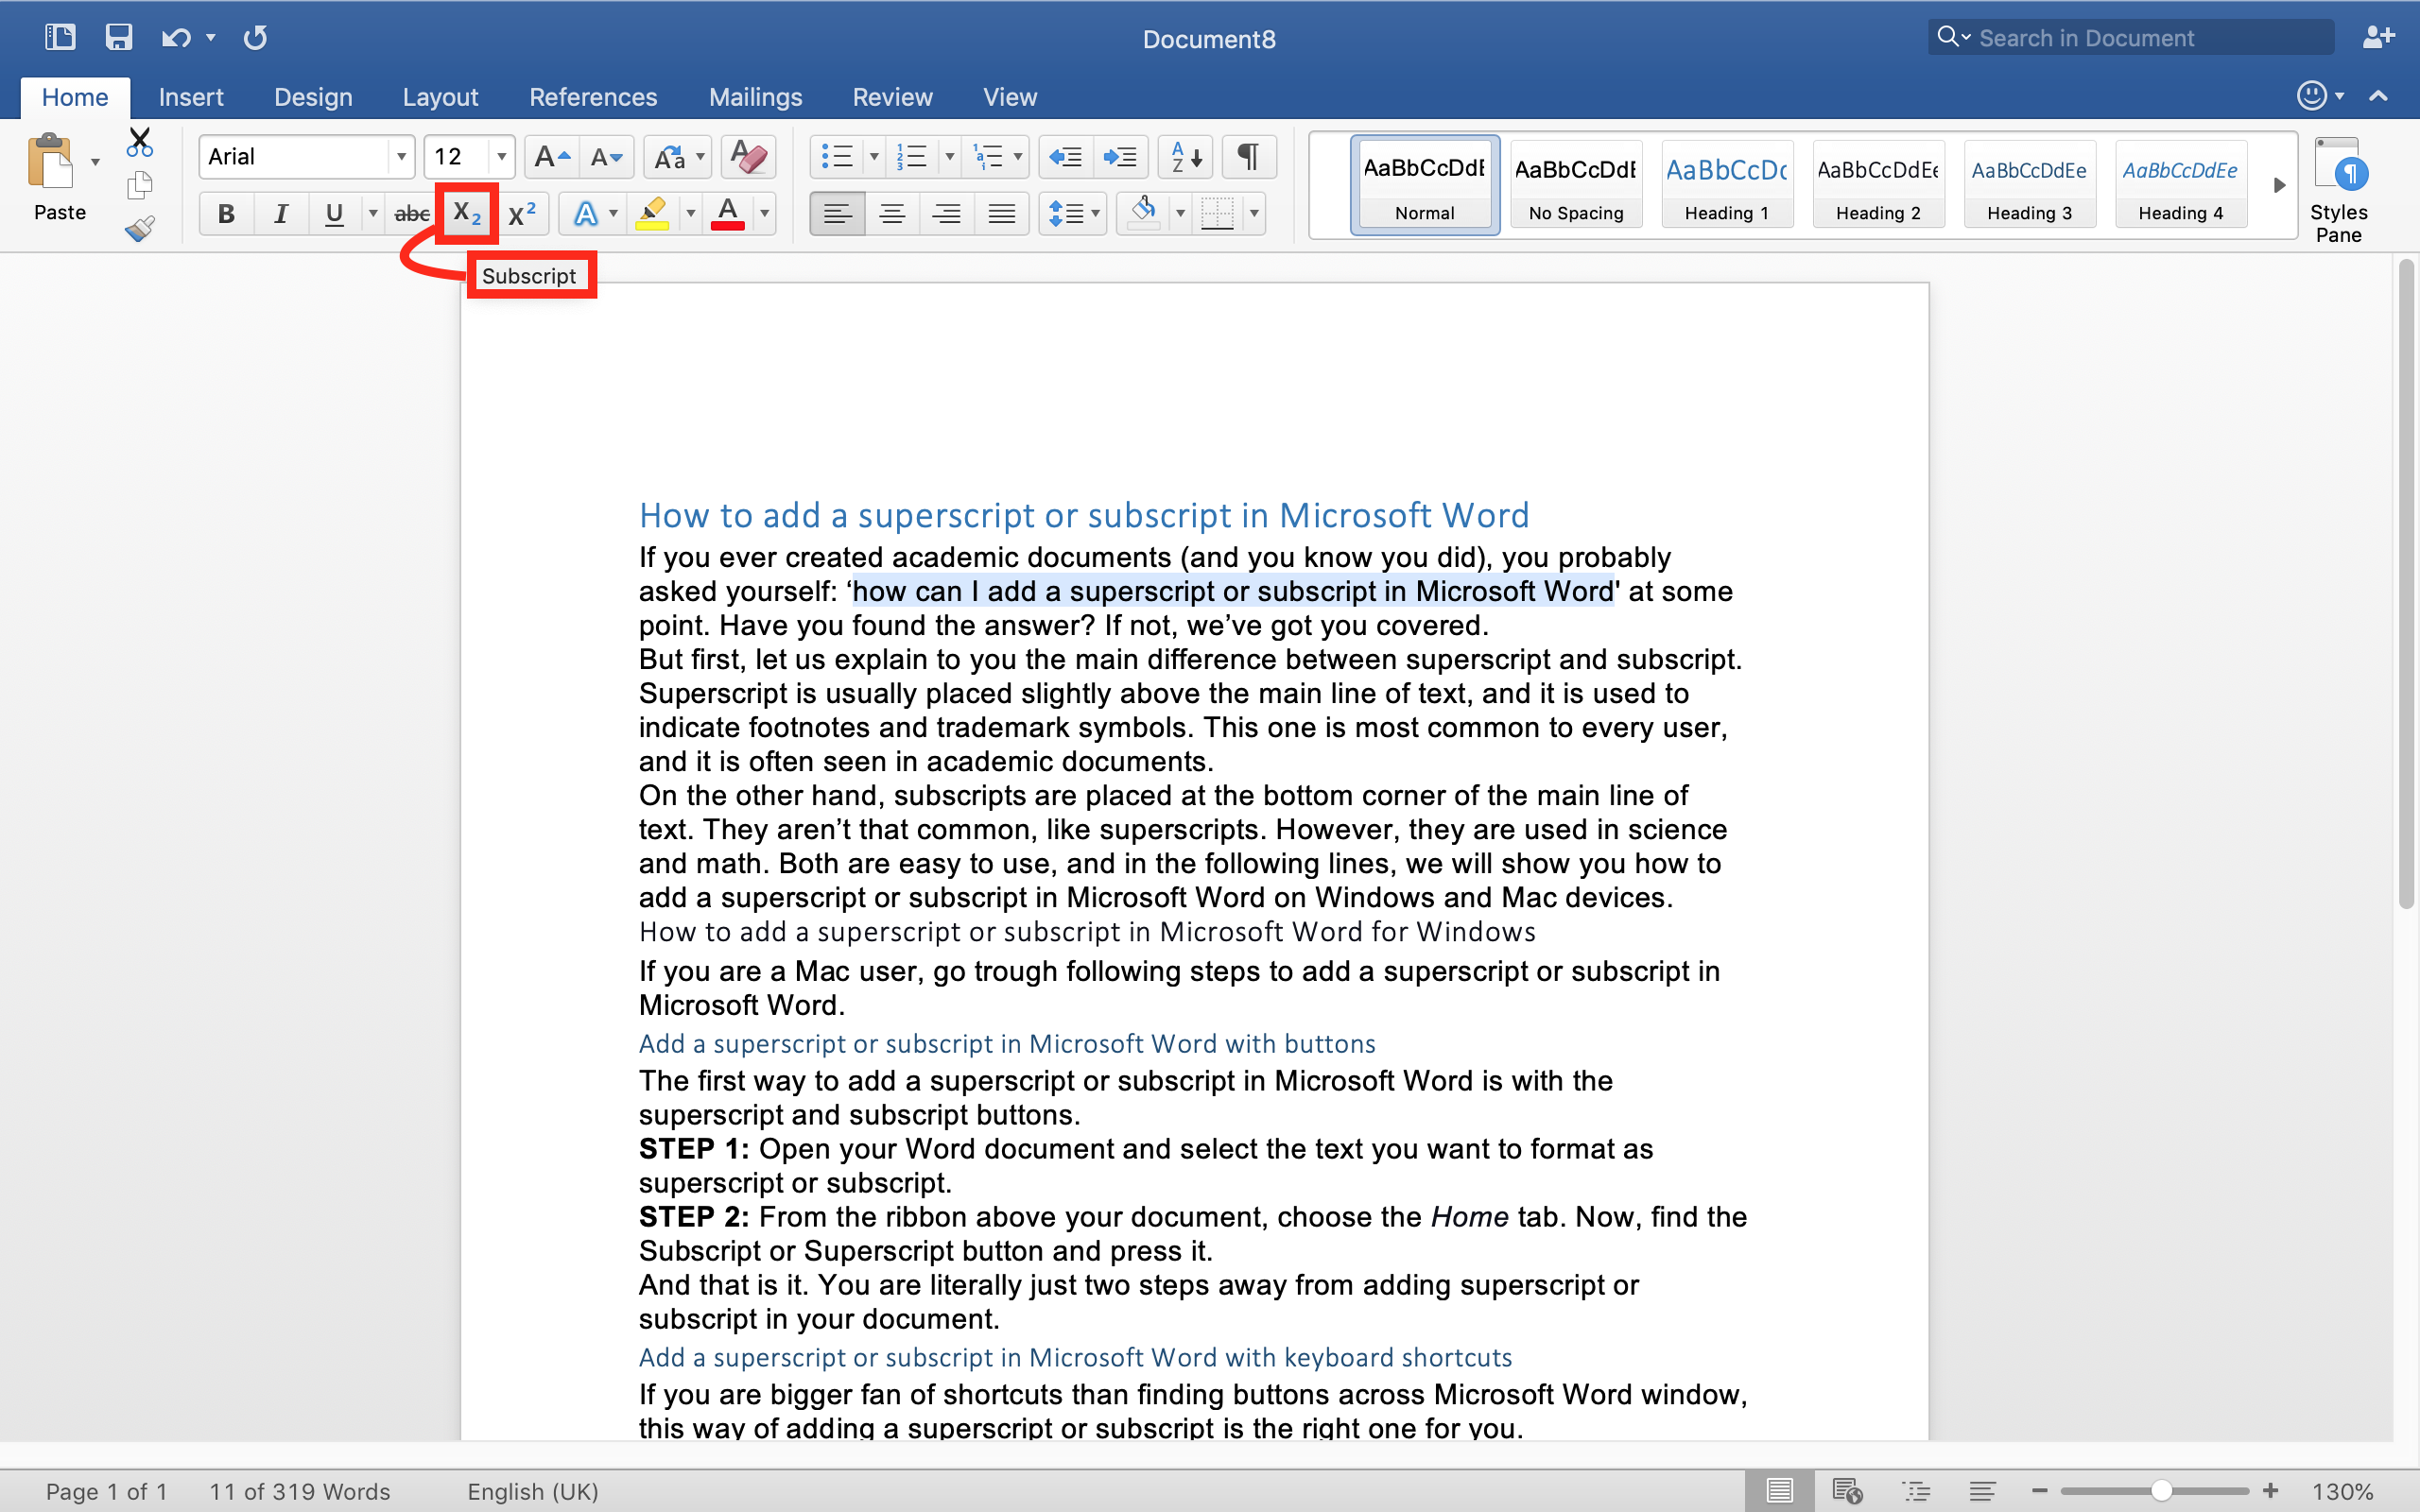 add a superscript or subscript in Microsoft Word document